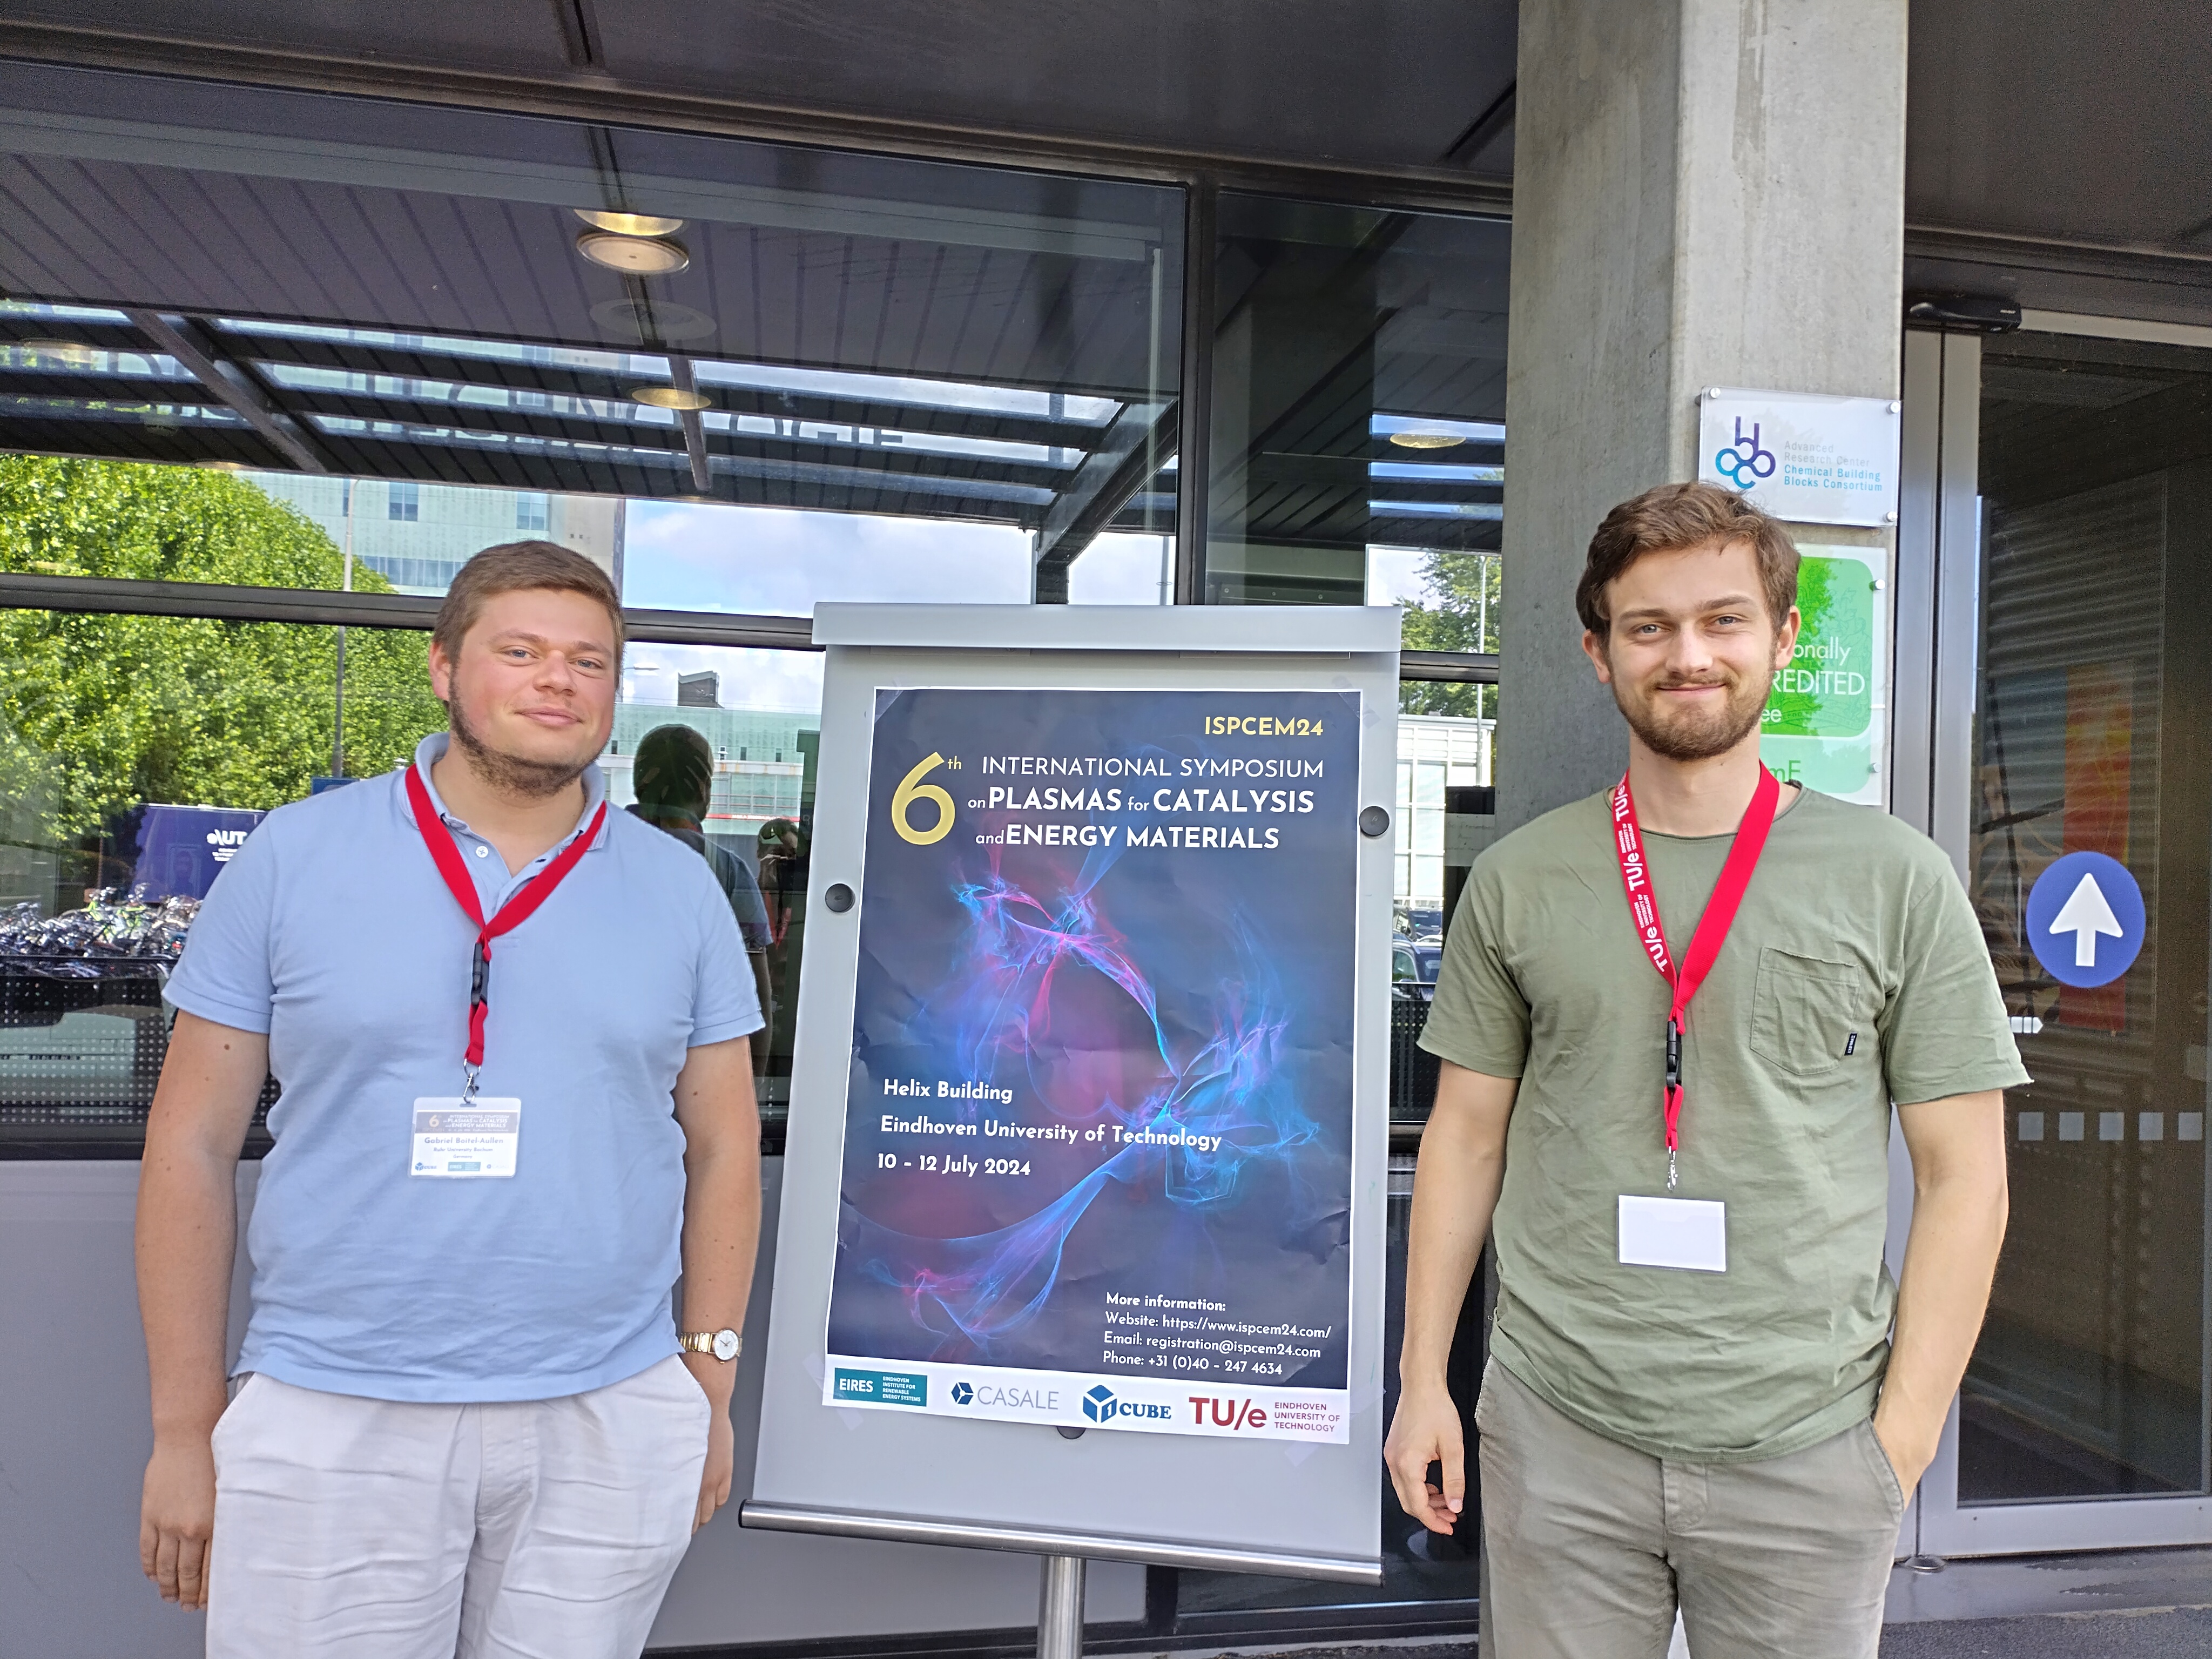 Gabriel and Steijn in next to a conference poster